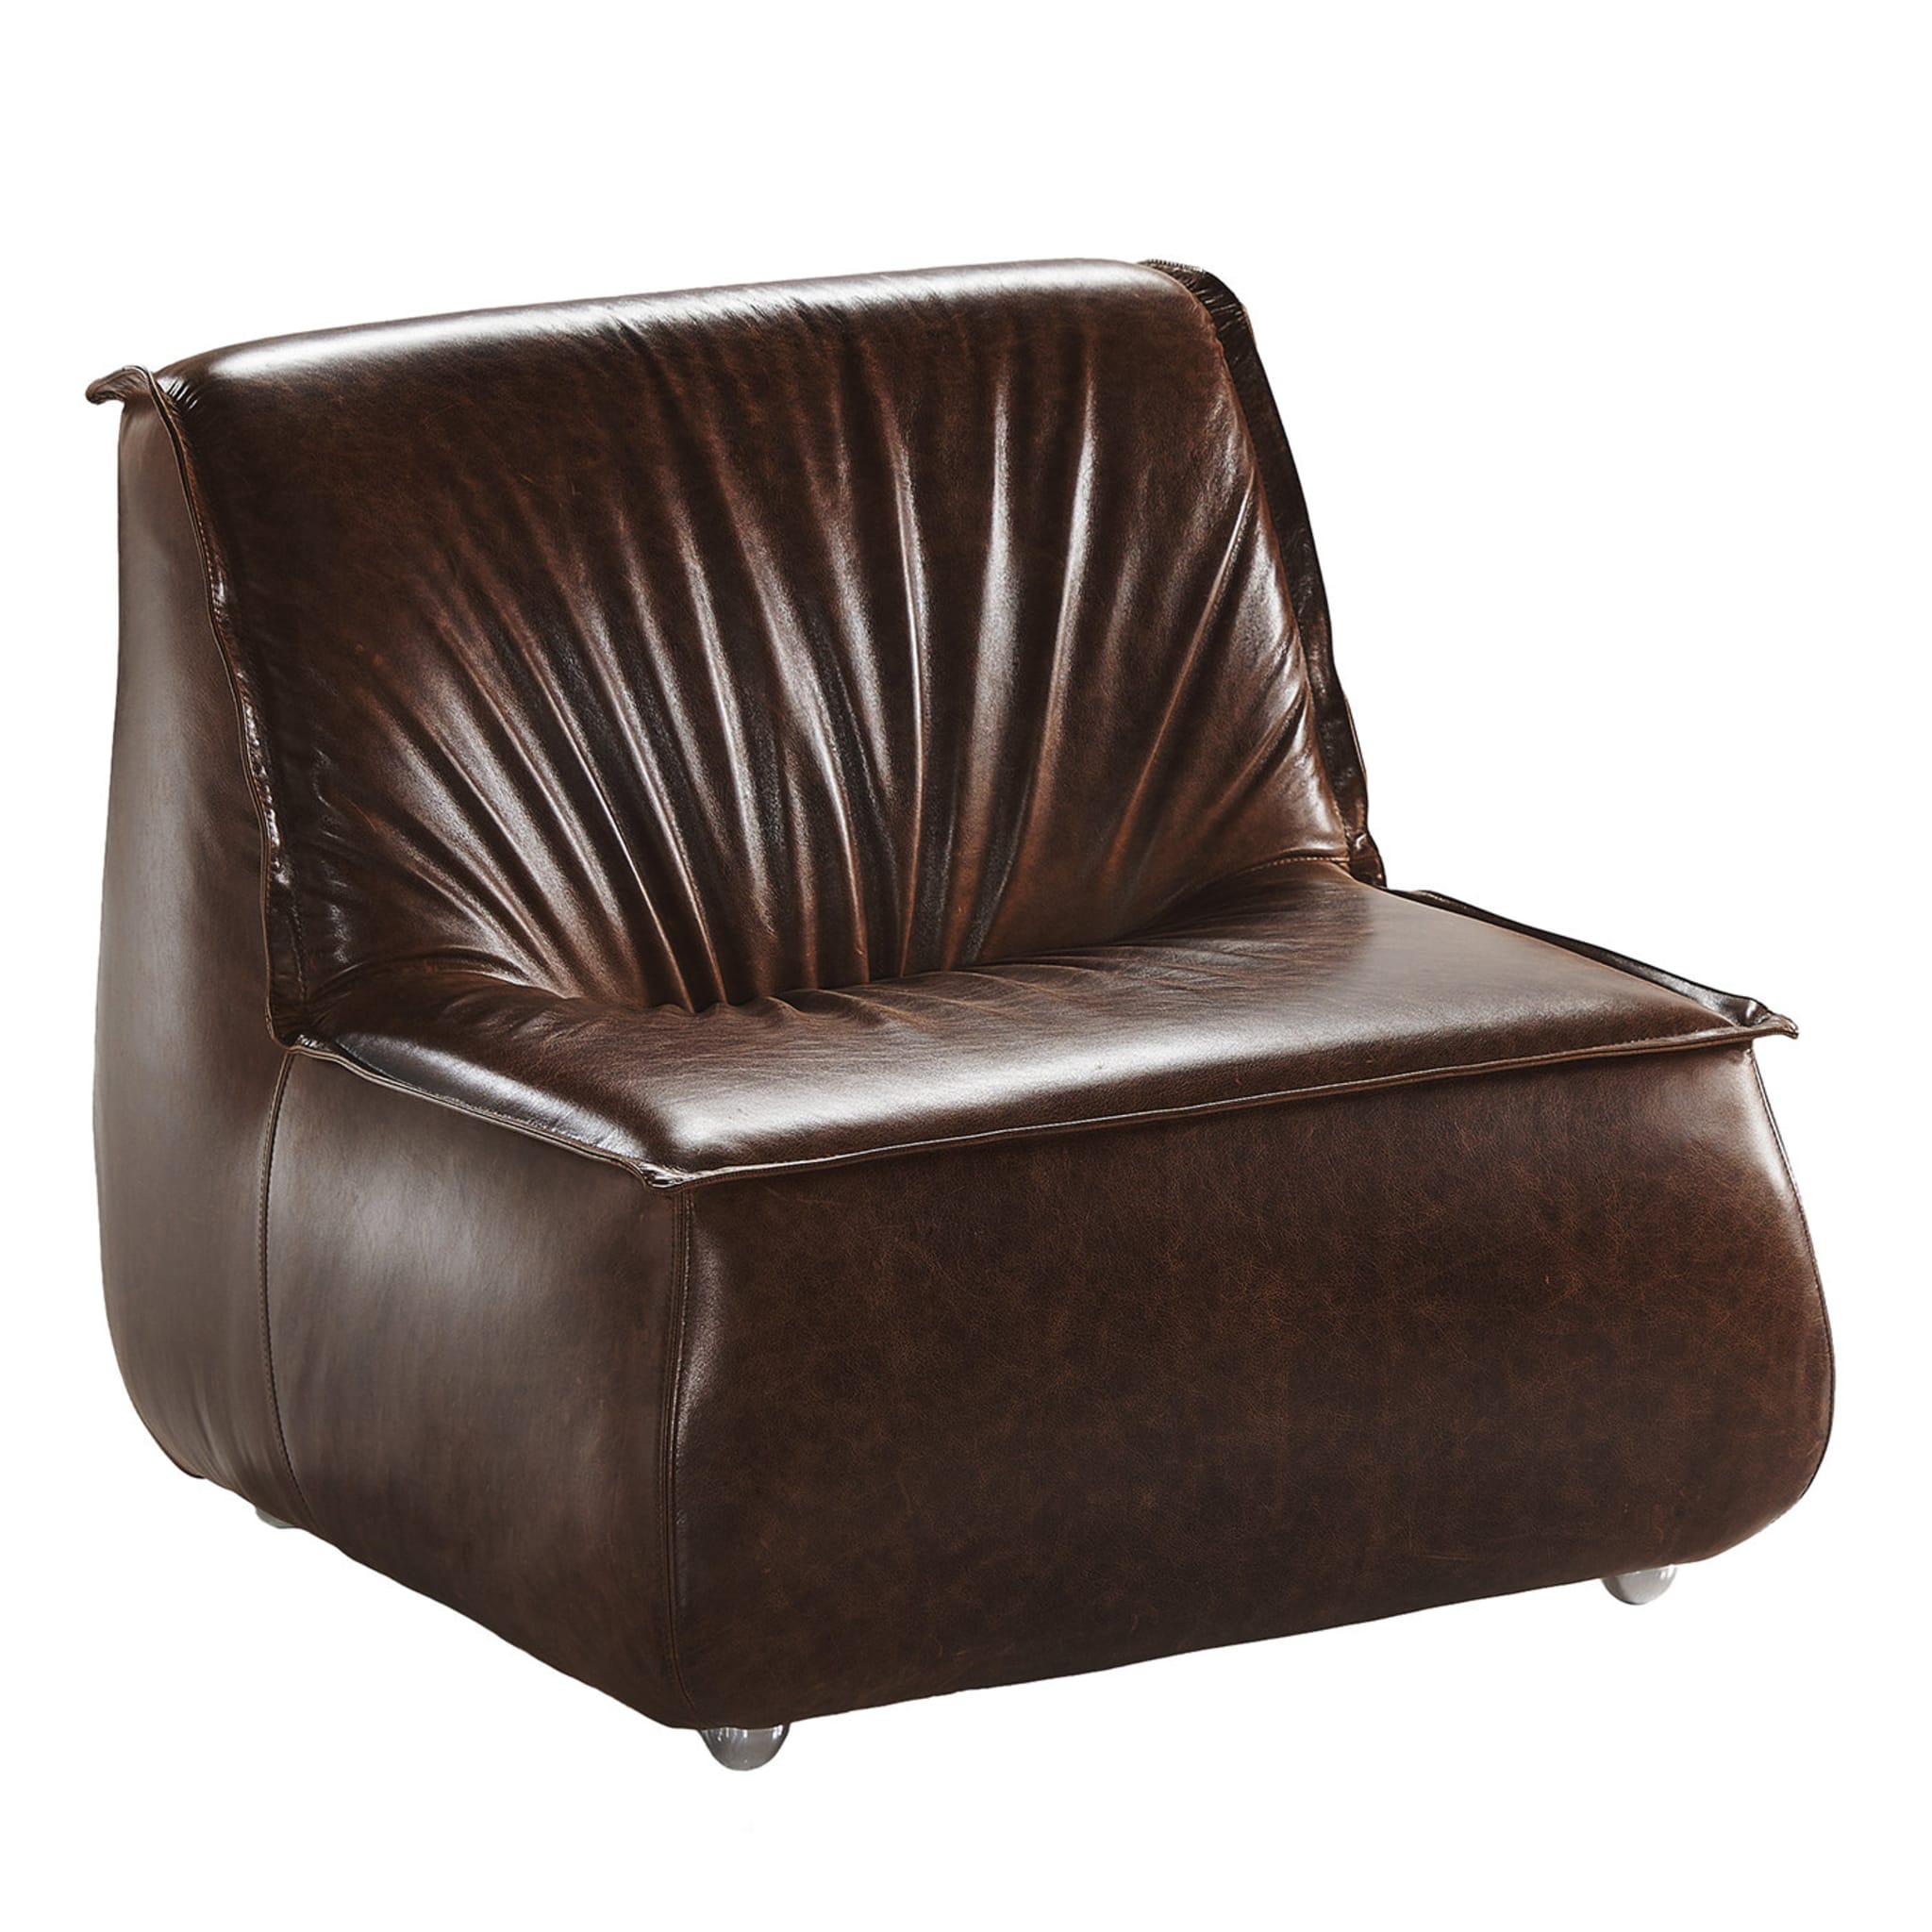 Zoe Brown Leather Lounge Chair - Main view